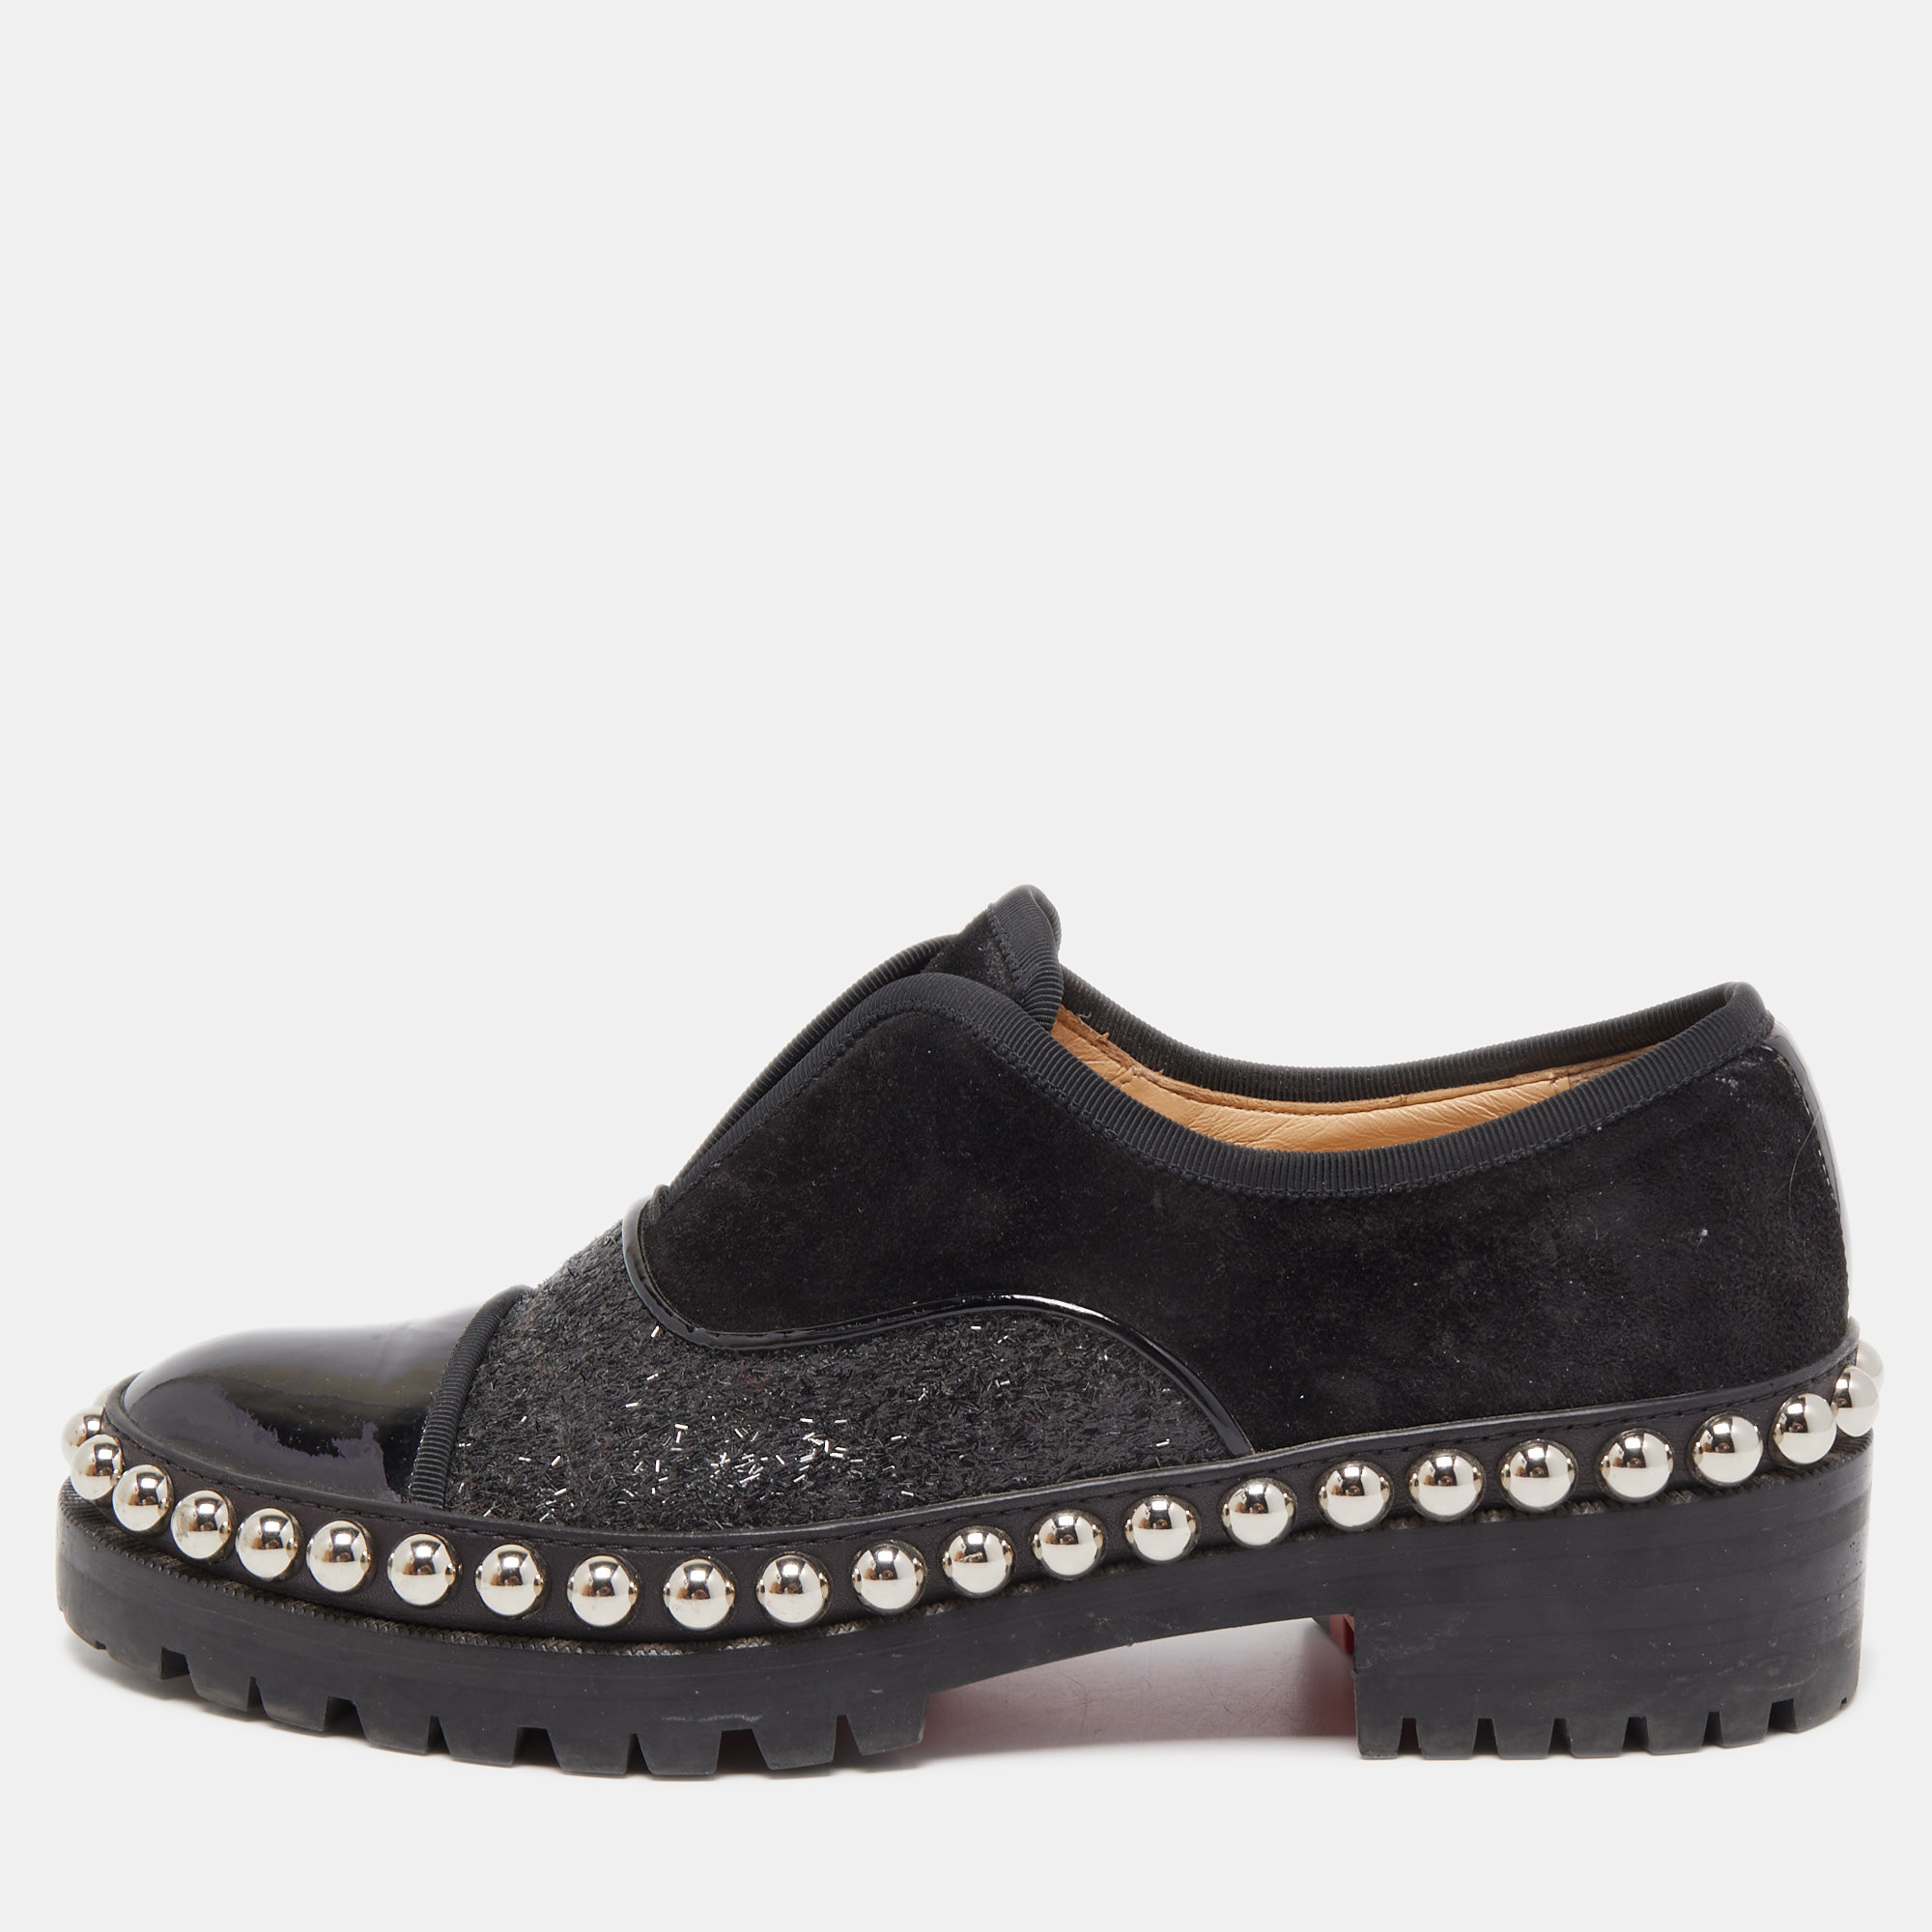 

Christian Louboutin Black Suede, Glitter and Patent Leather Alphacroc Oxfords Size